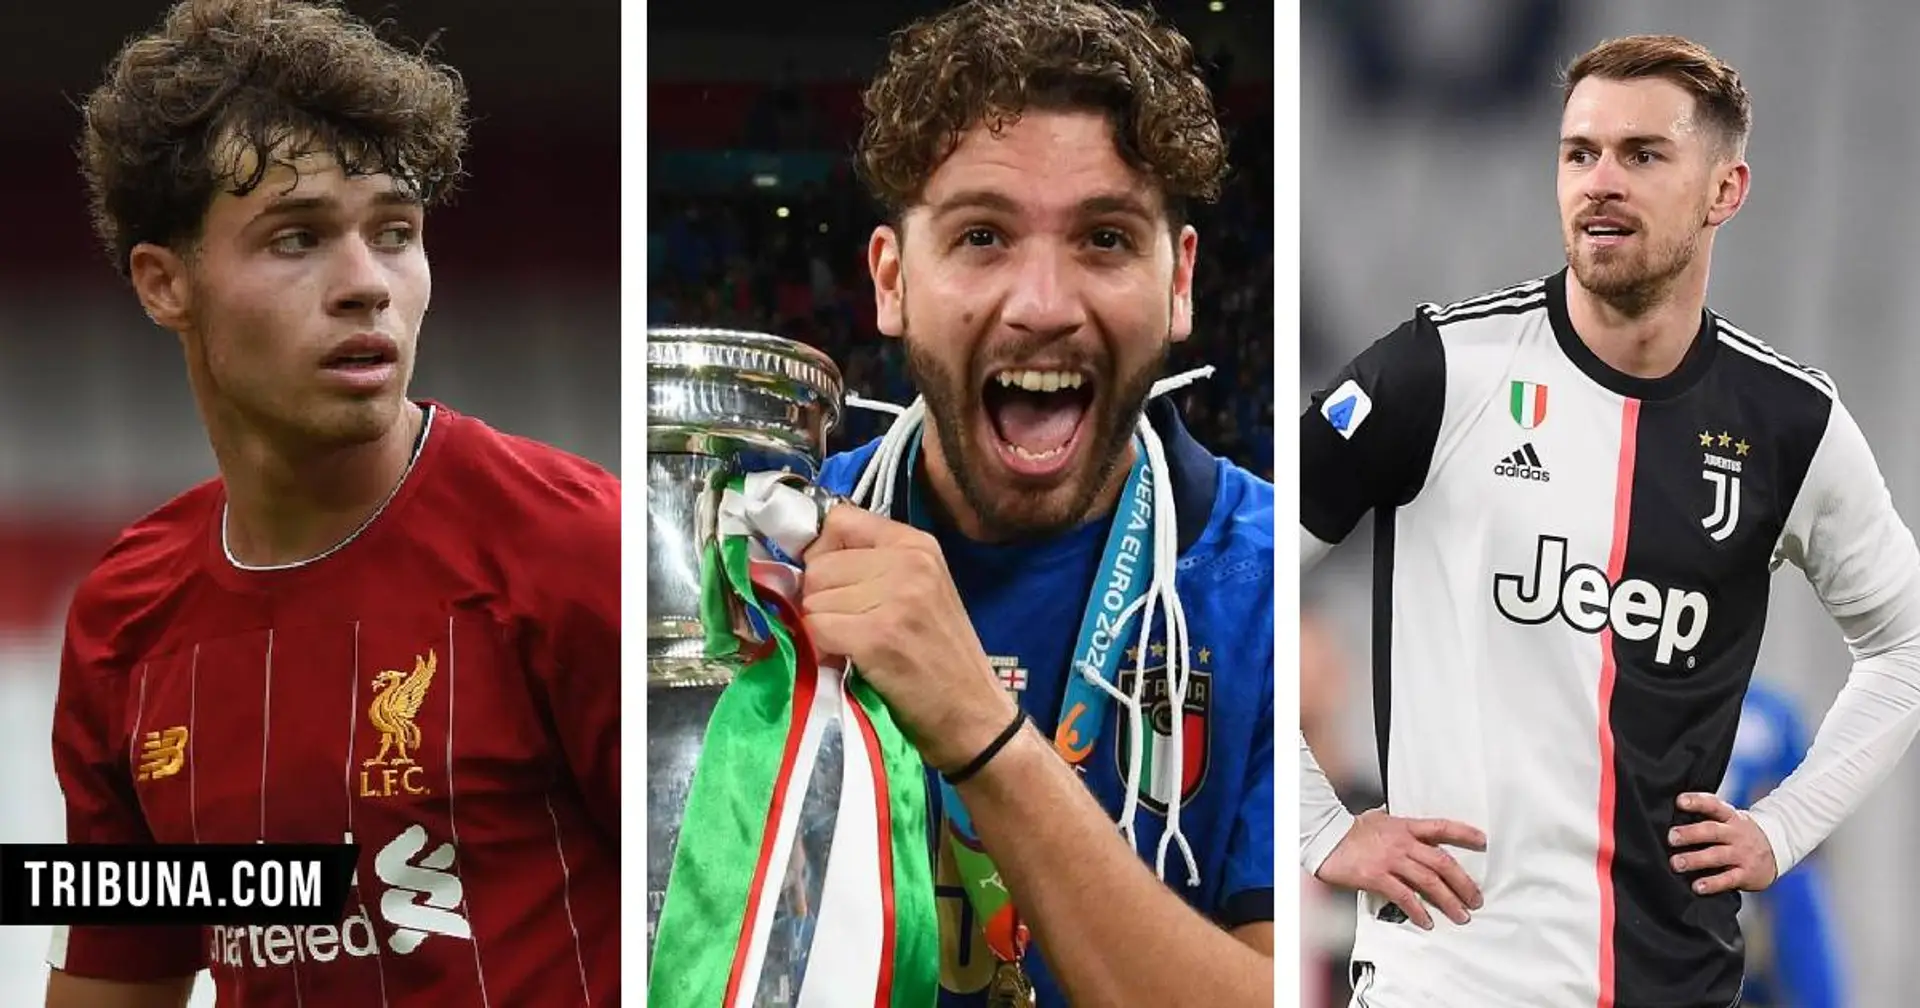 New links to Isco and Locatelli: Liverpool's latest transfer round-up with probability ratings